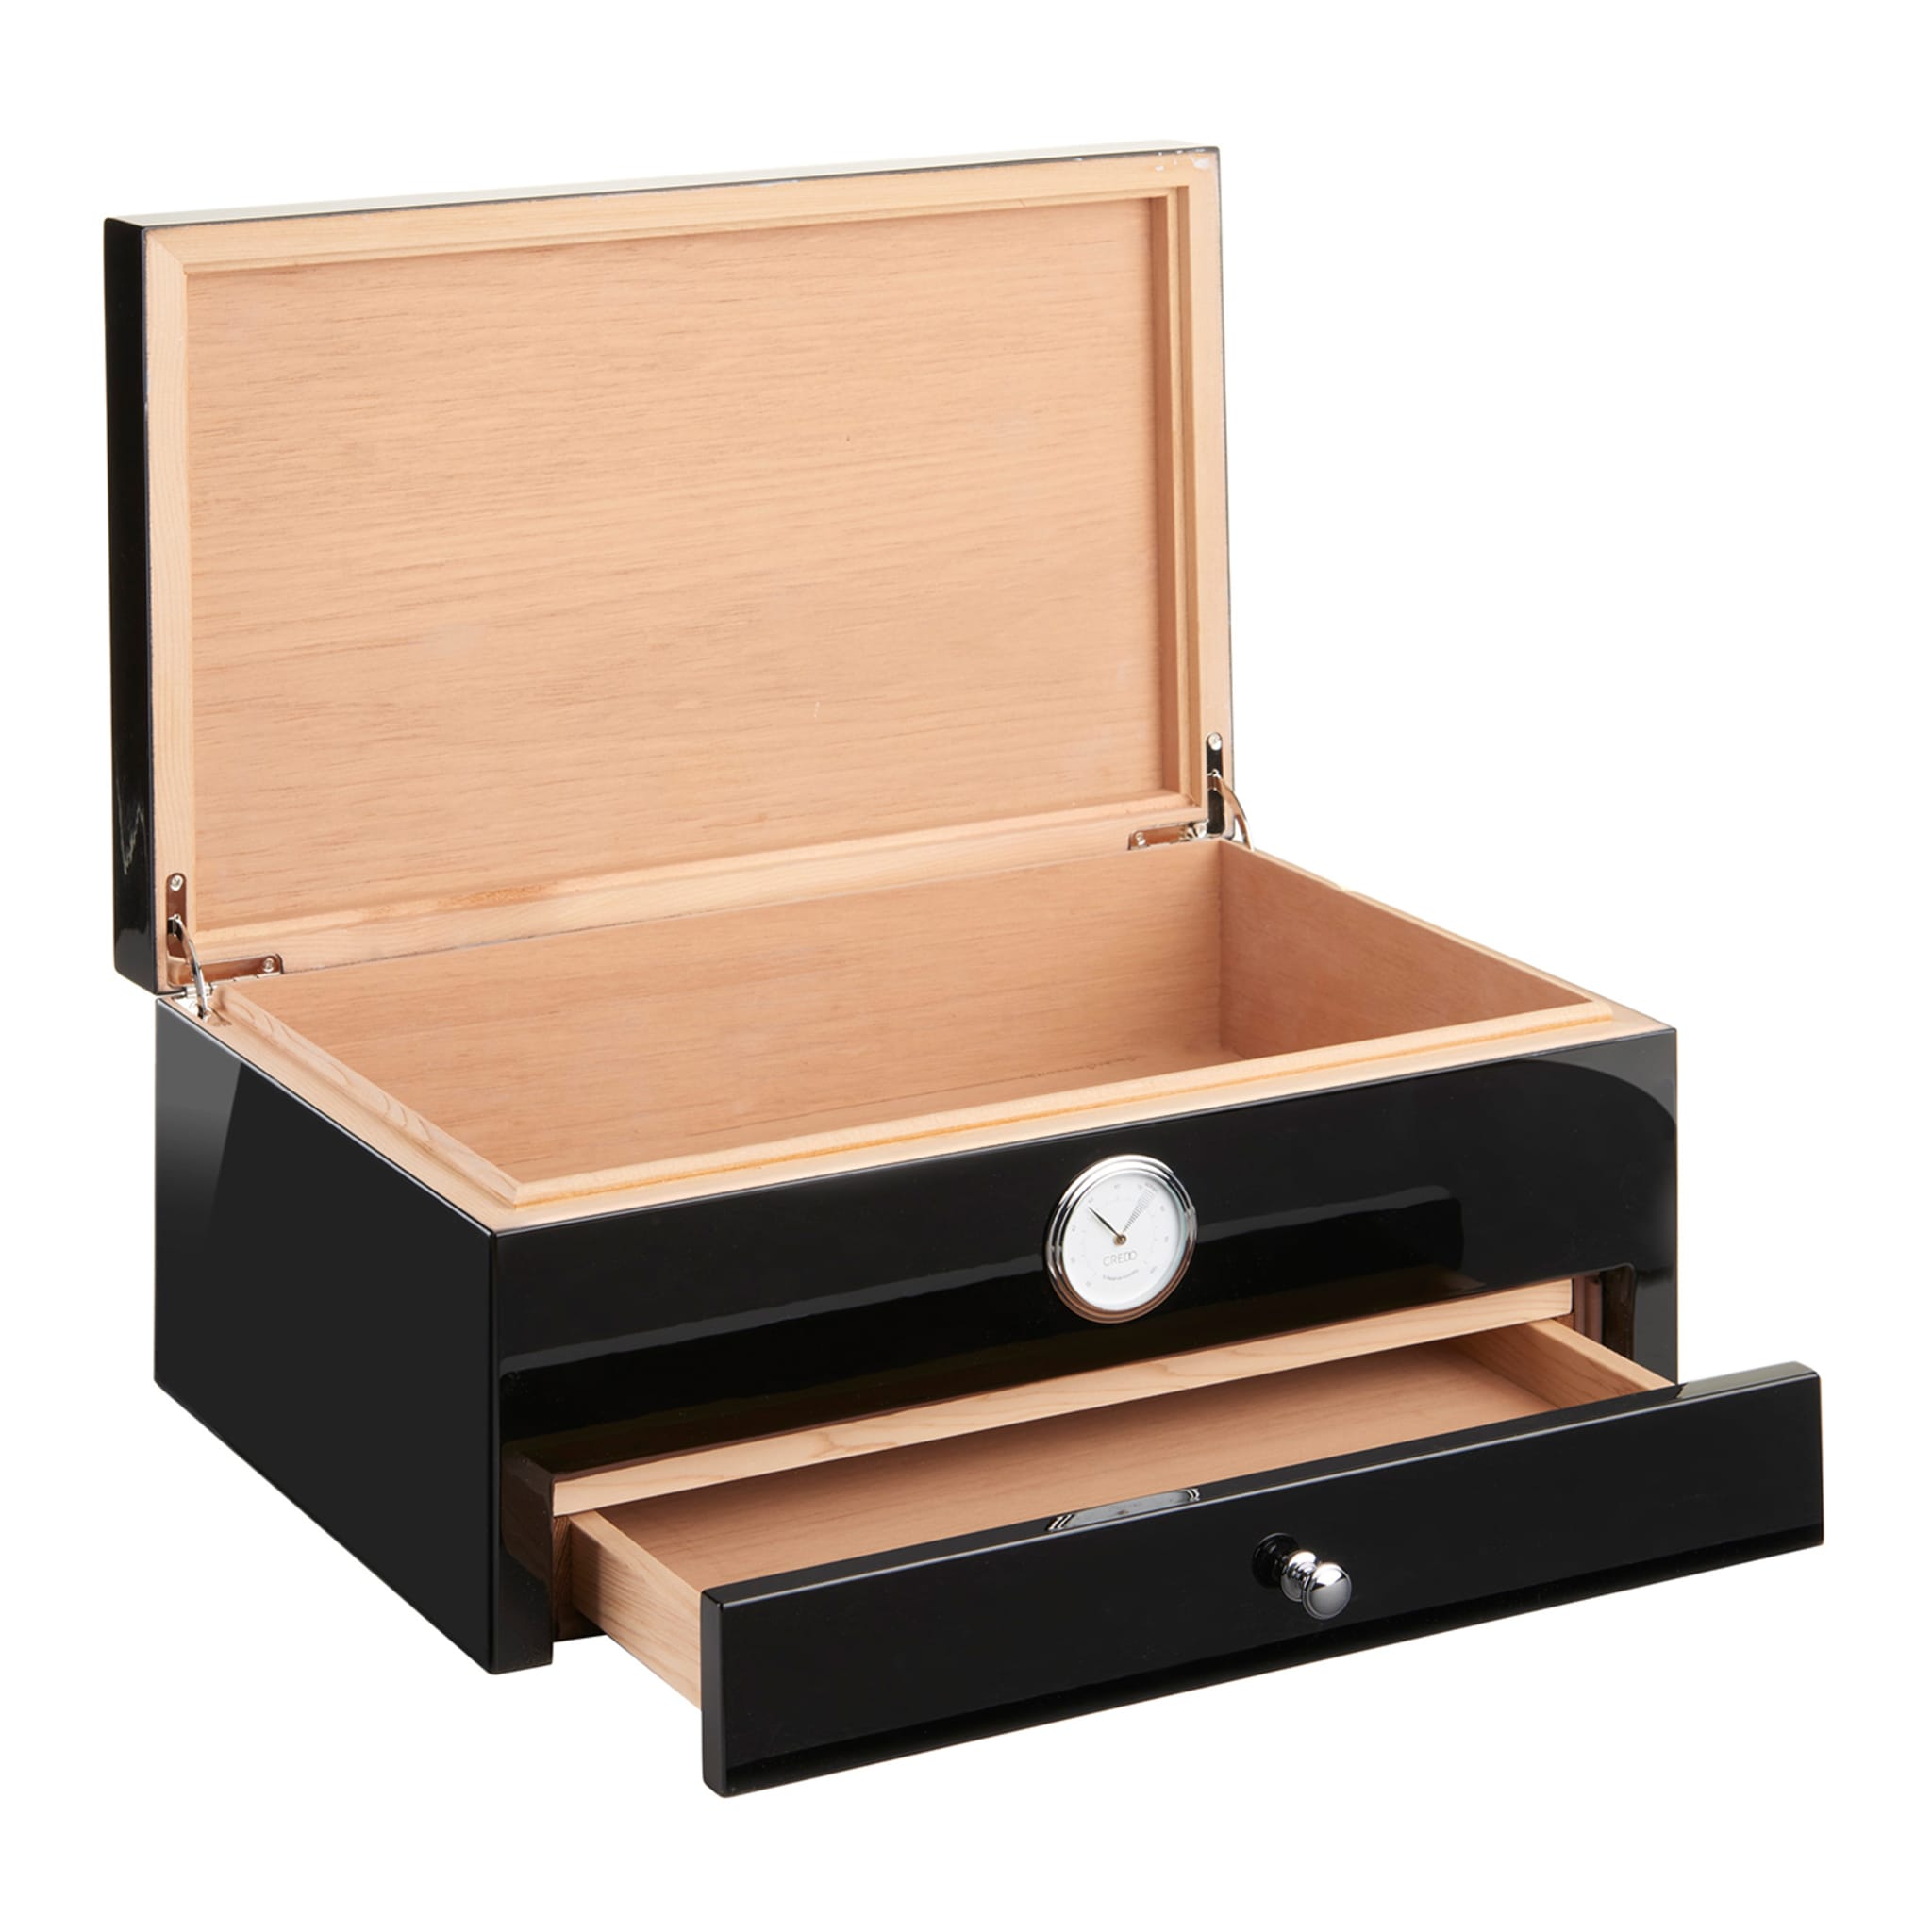 Full Color Black Humidor (Special Club Edition) - Alternative view 2